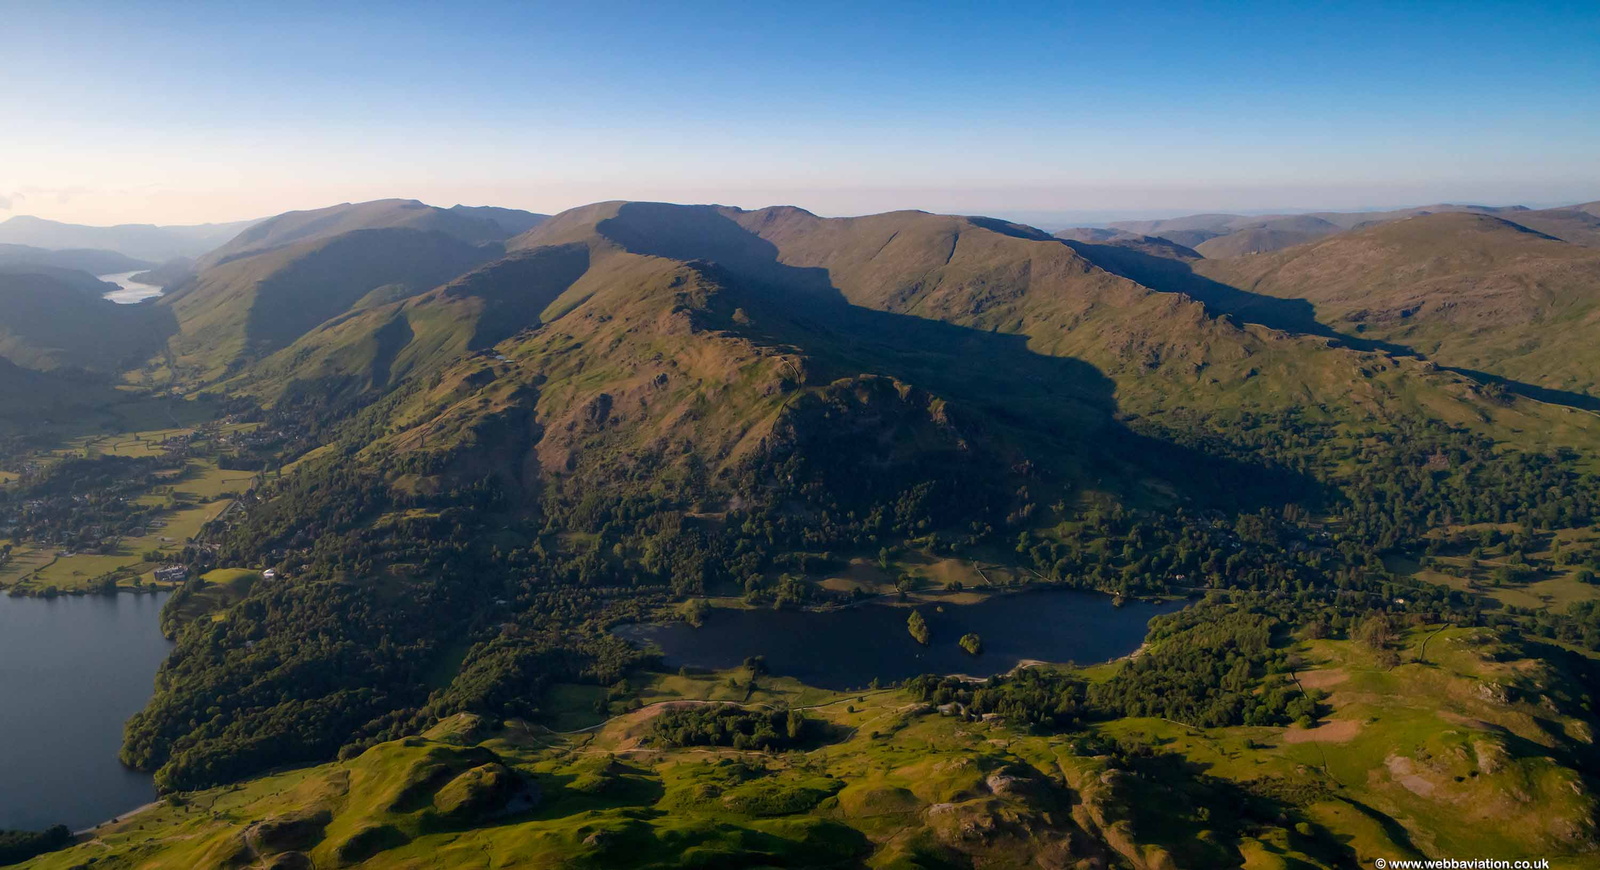 Rydal Water in the Lake District from the air